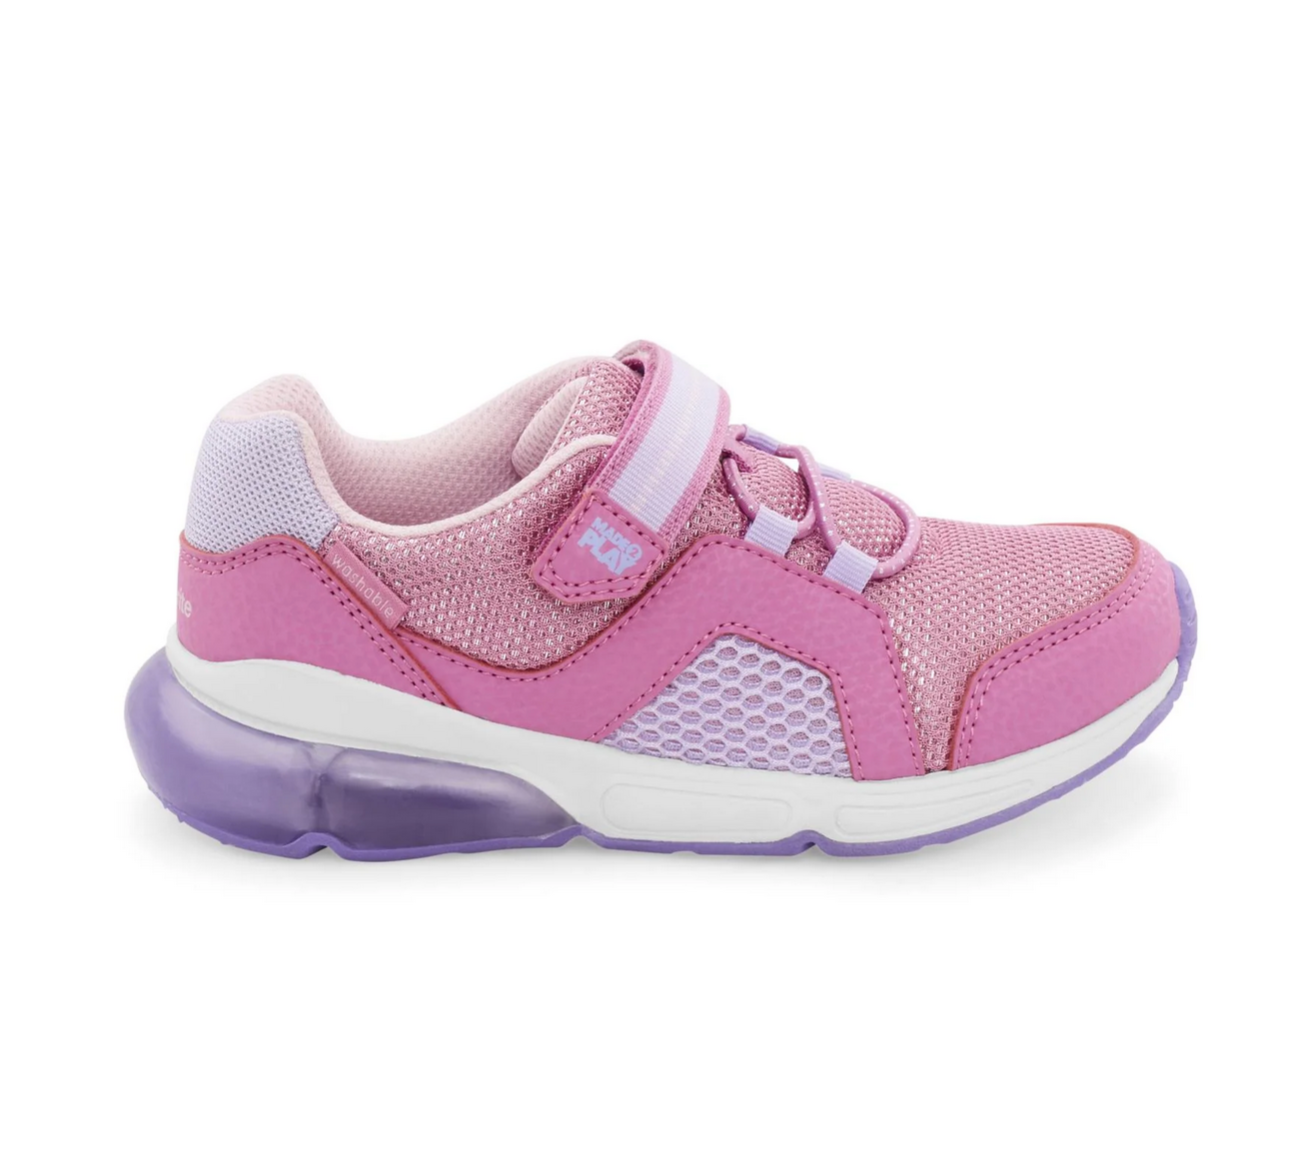 Stride Rite Made2Play Light-up Pink Sneakers